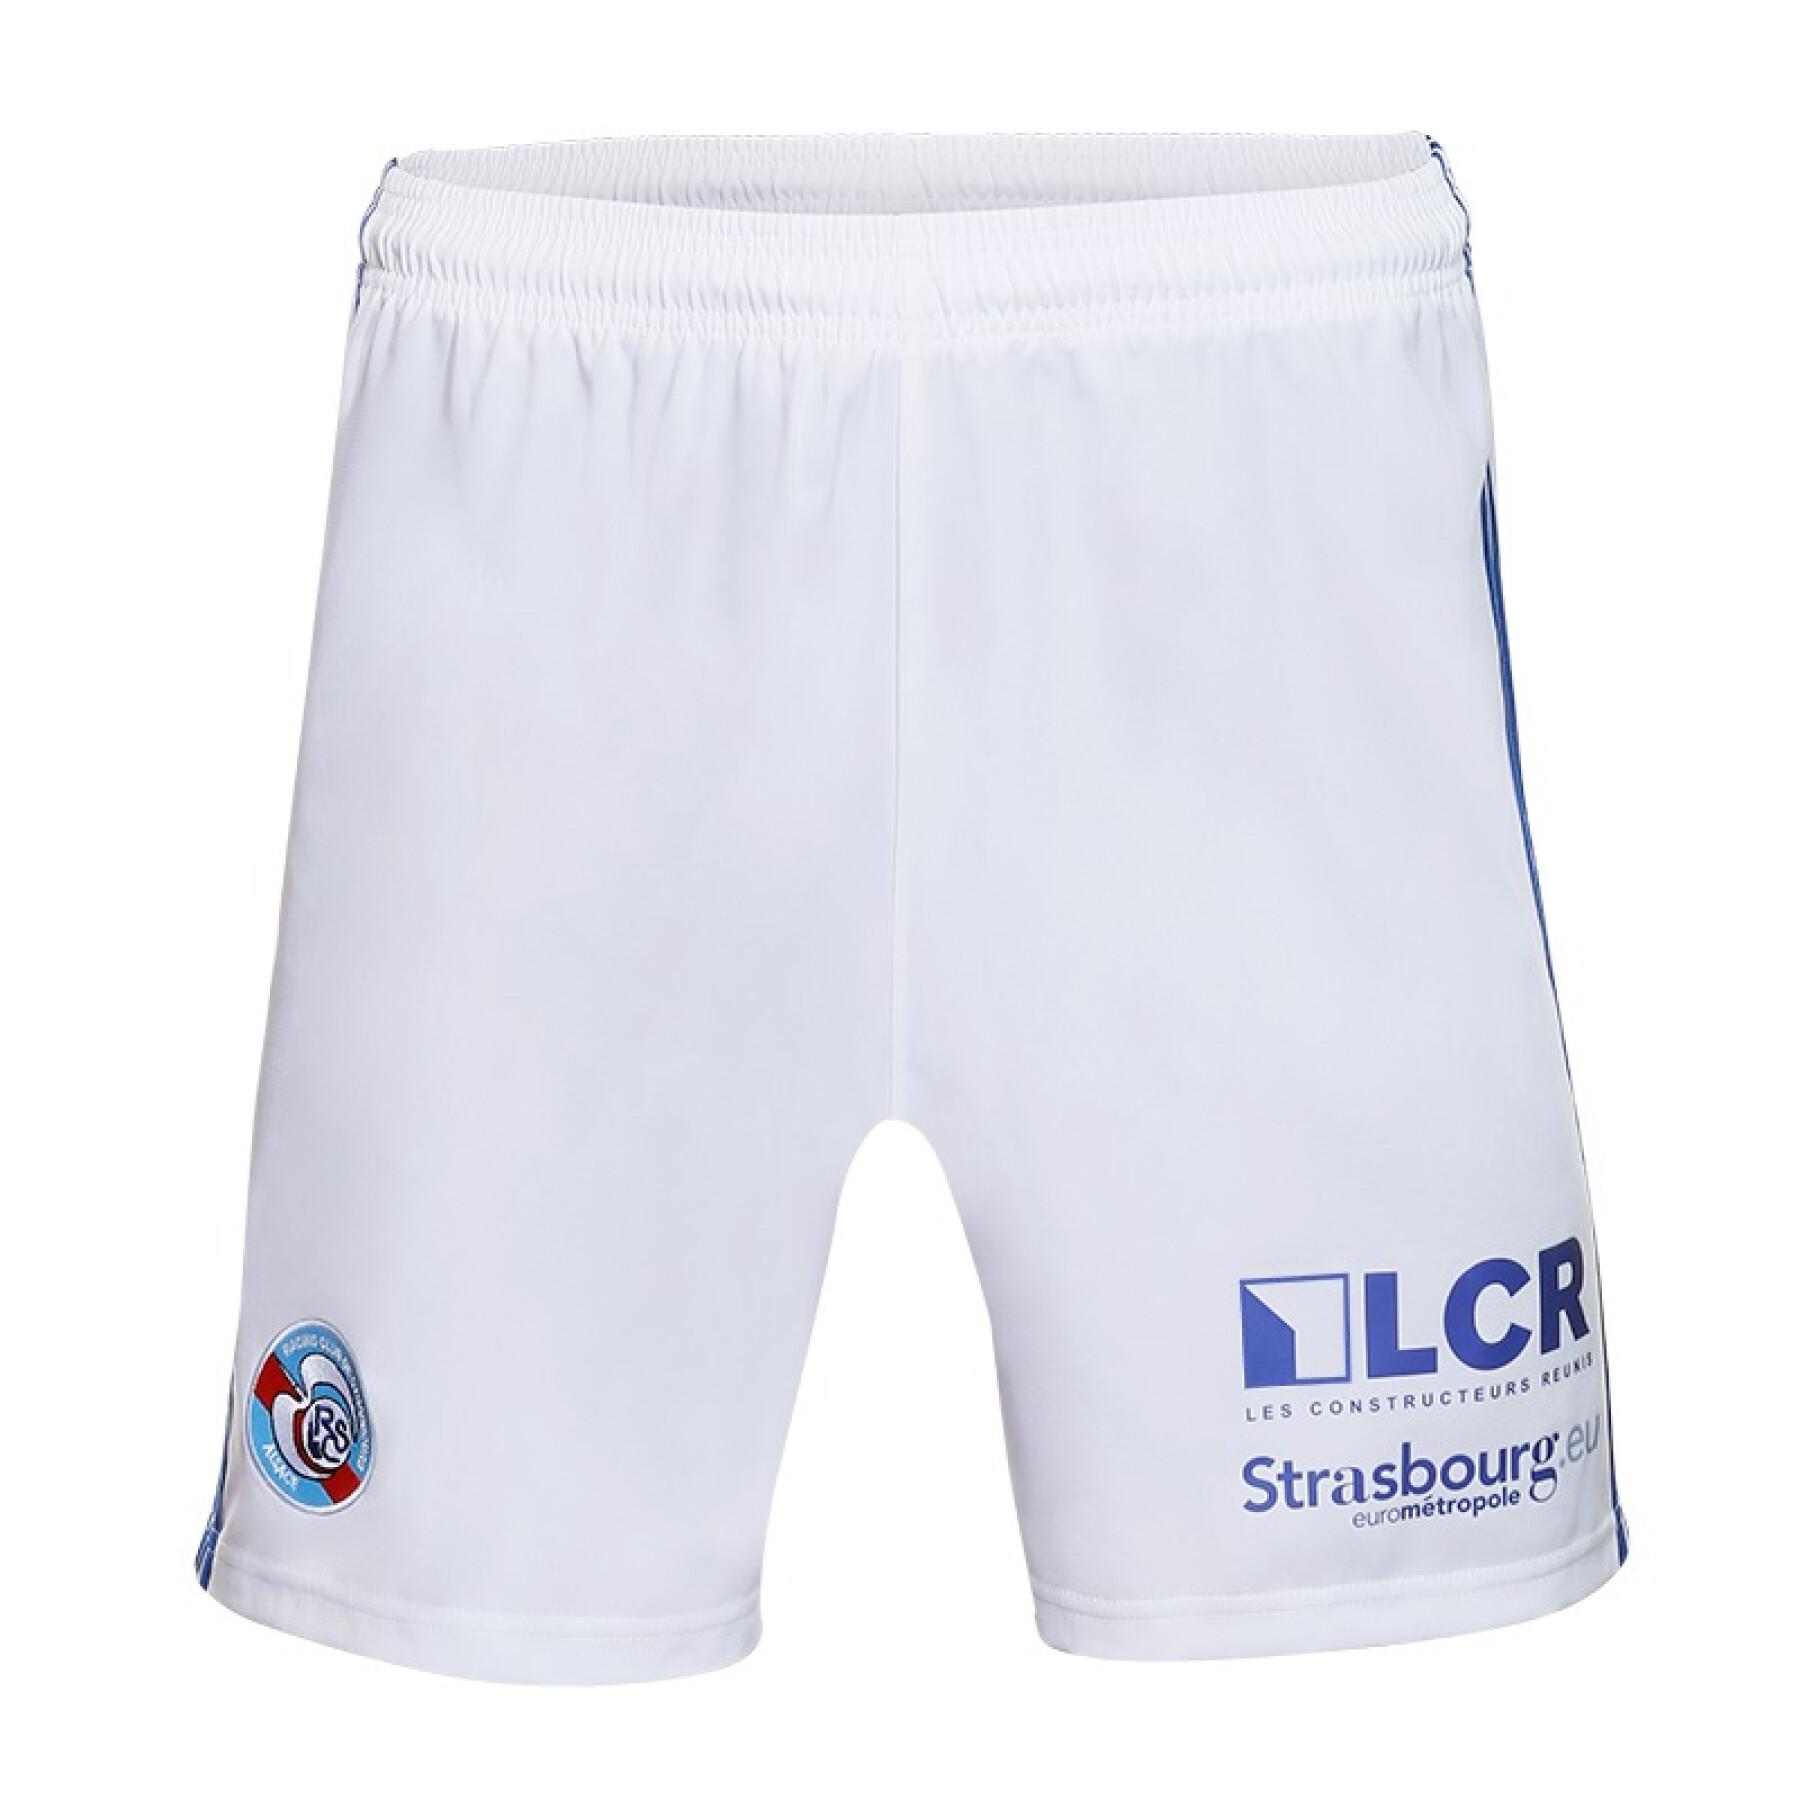 Home shorts RC Strasbourg Alsace 2019/20